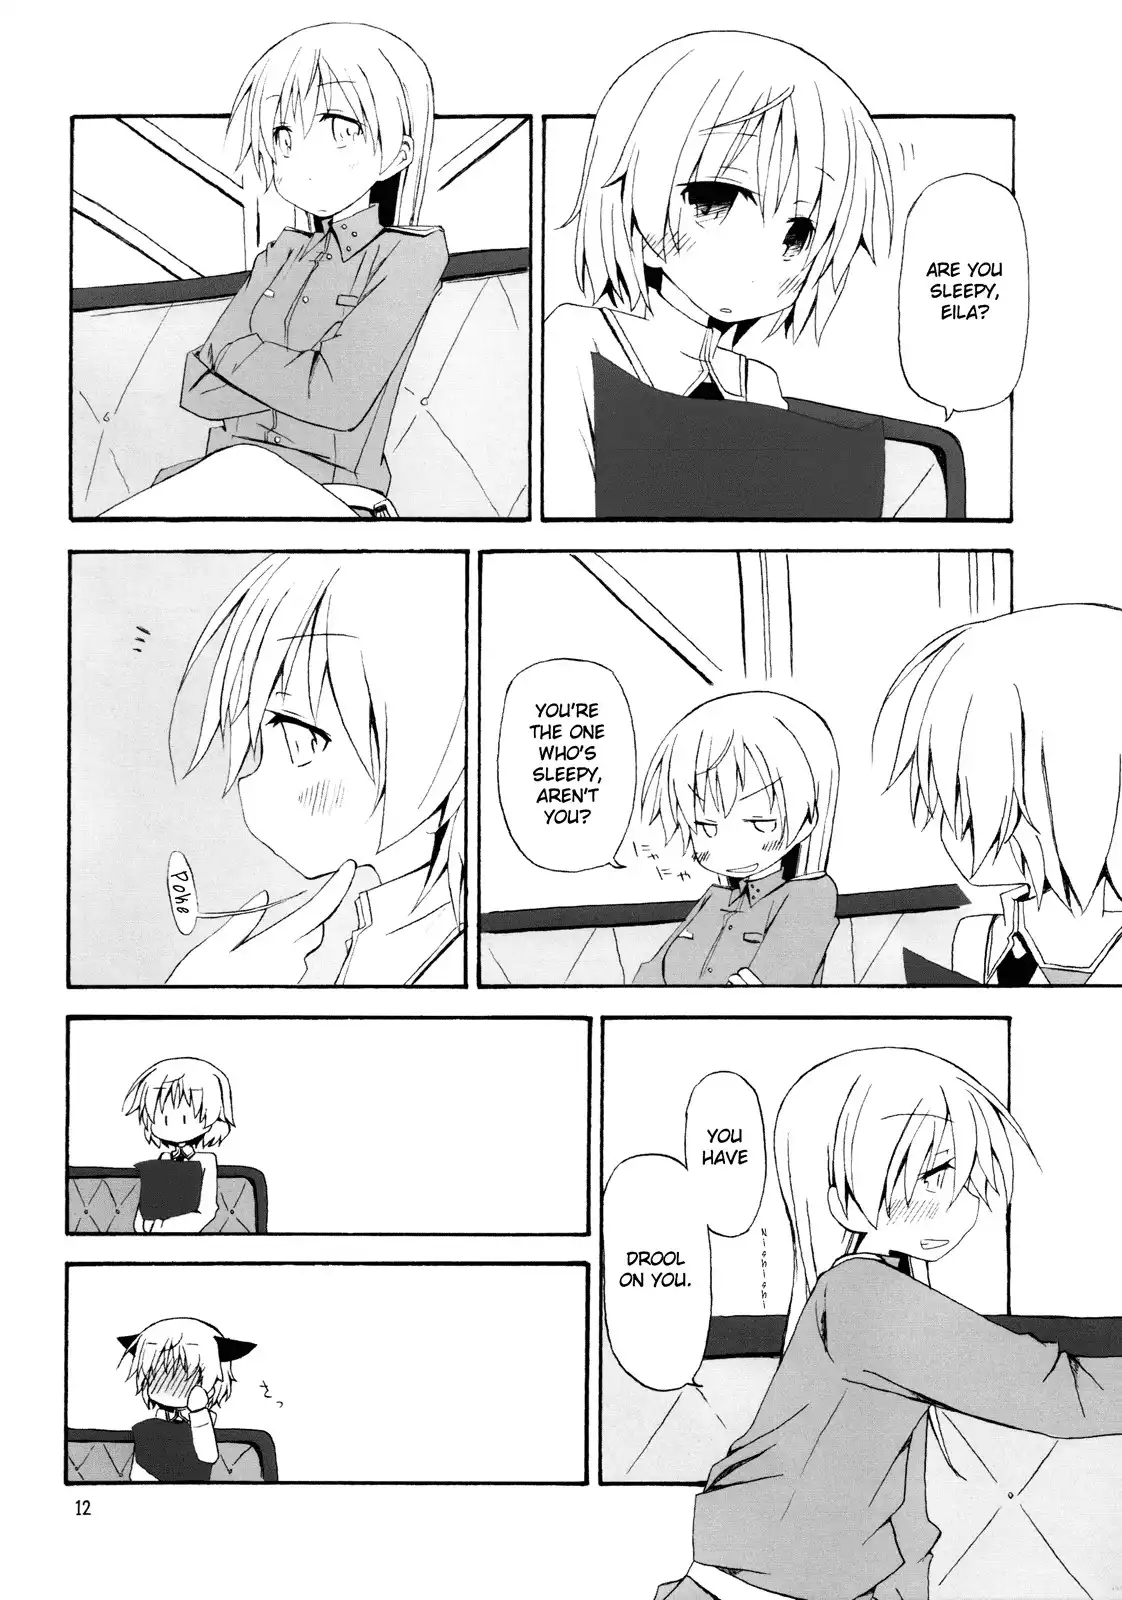 Strike Witches - Go Hppy! (Doujinshi) Chapter 0